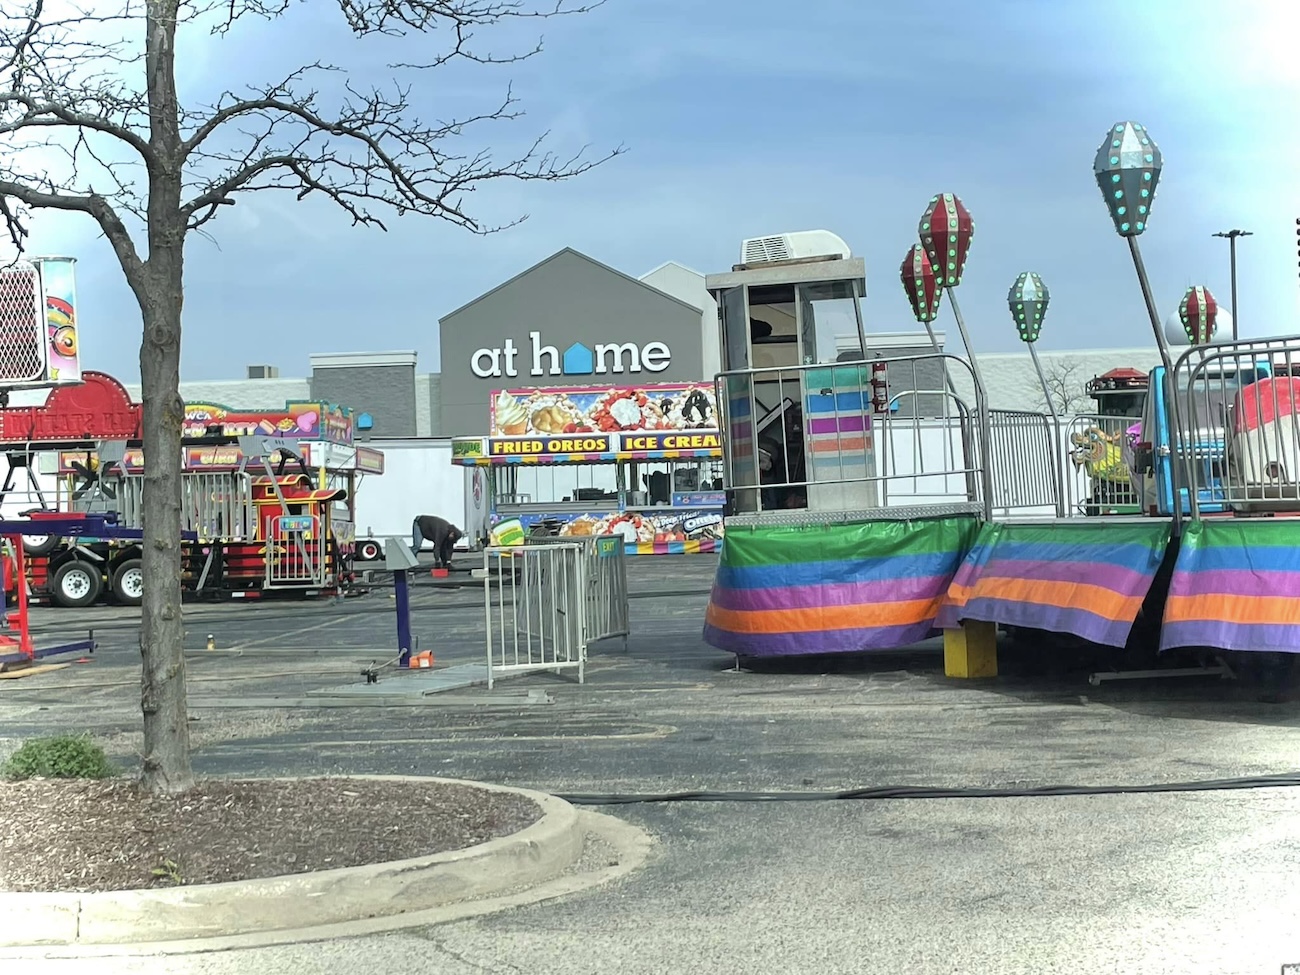 The carnival in Lake in the Hills that had to shut down early, due to large fights breaking out, will be in Huntley for its Cinco De Mayo festivities.